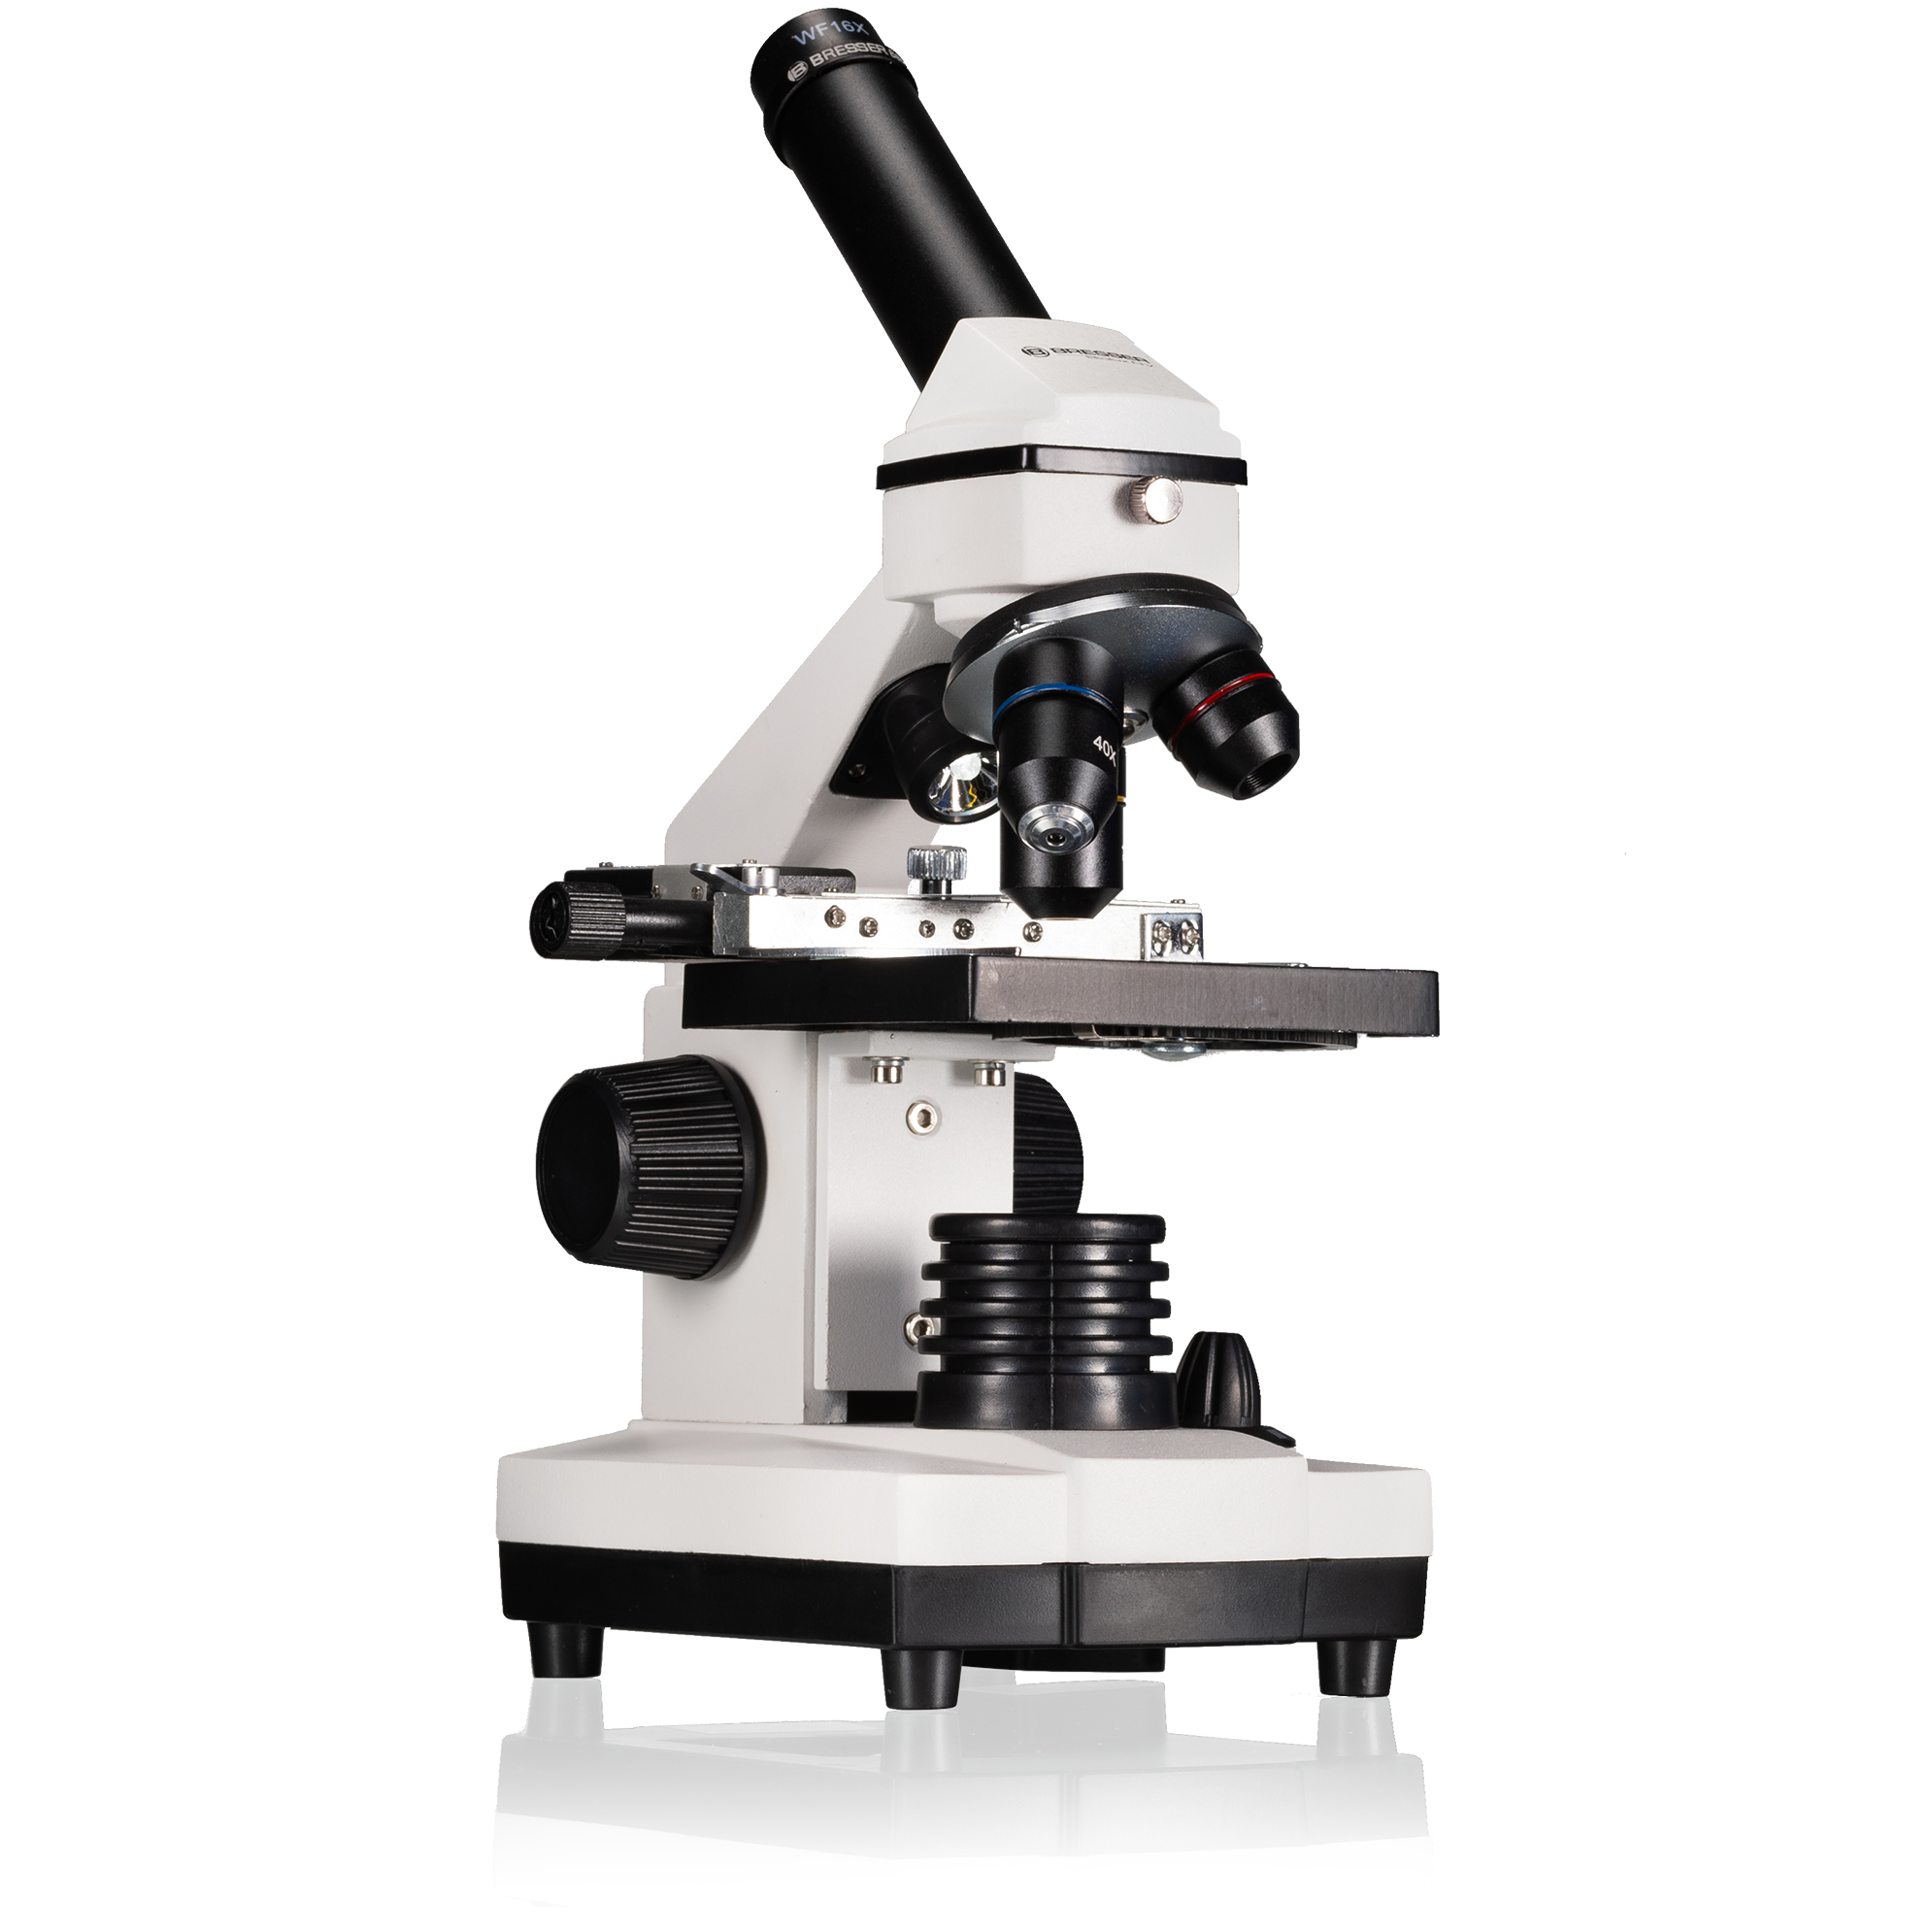 Expand Your | Bresser | with USB BRESSER Microscope 20x-1280x Horizon HD Biolux NV Camera